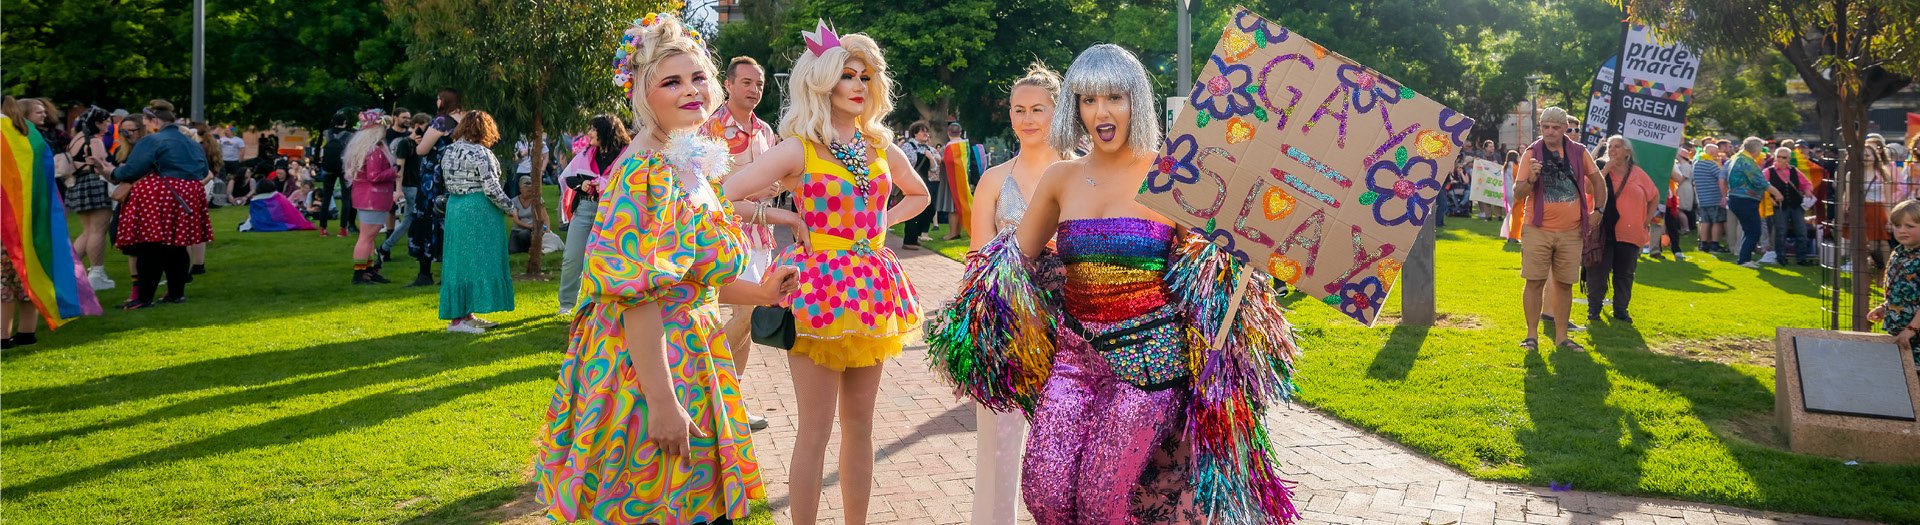 A crowd of people in a park , 4 people in the foreground in colourful outfits, the person on the far right is holding a sign which says 'Gay = Slay'